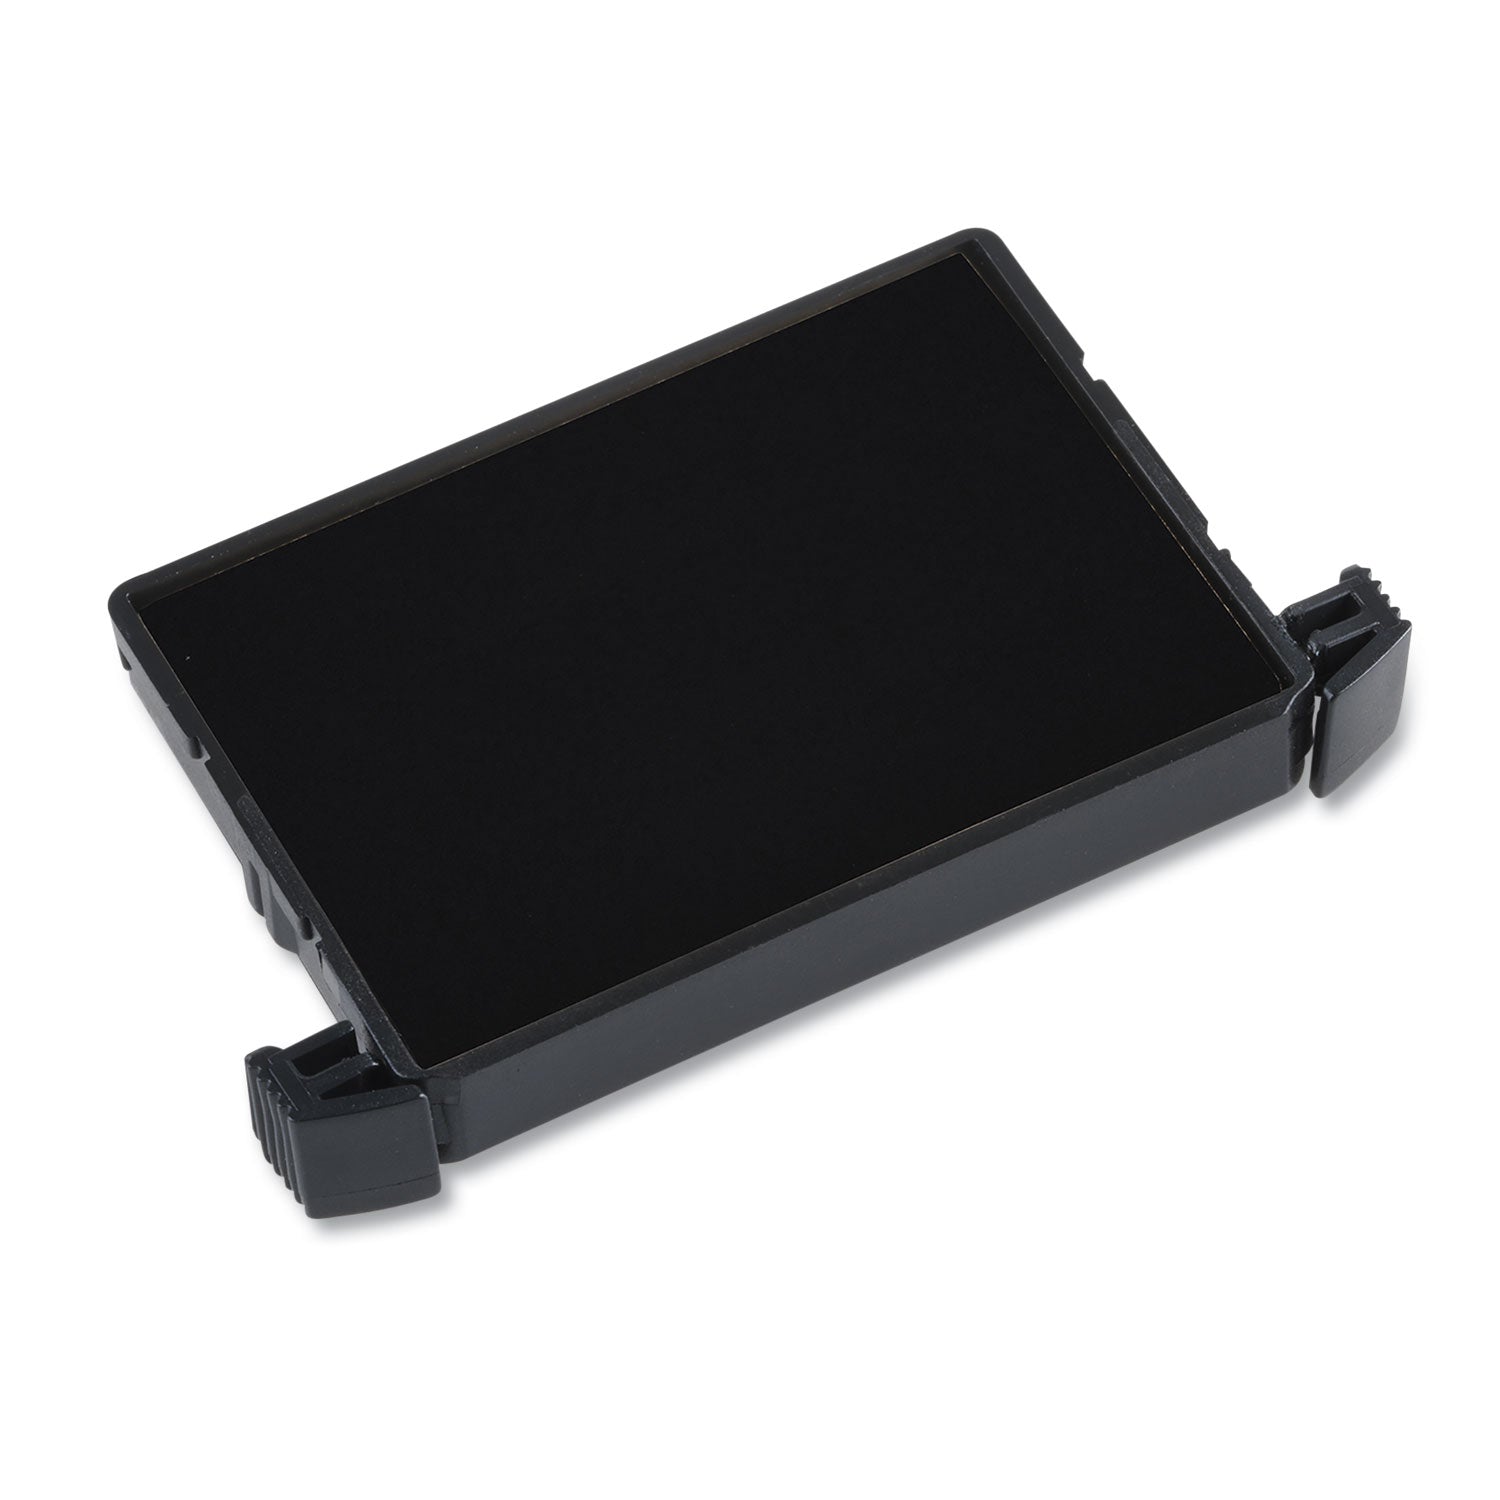 E4750 Printy Replacement Pad for Trodat Self-Inking Stamps, 1" x 1.63", Black - 